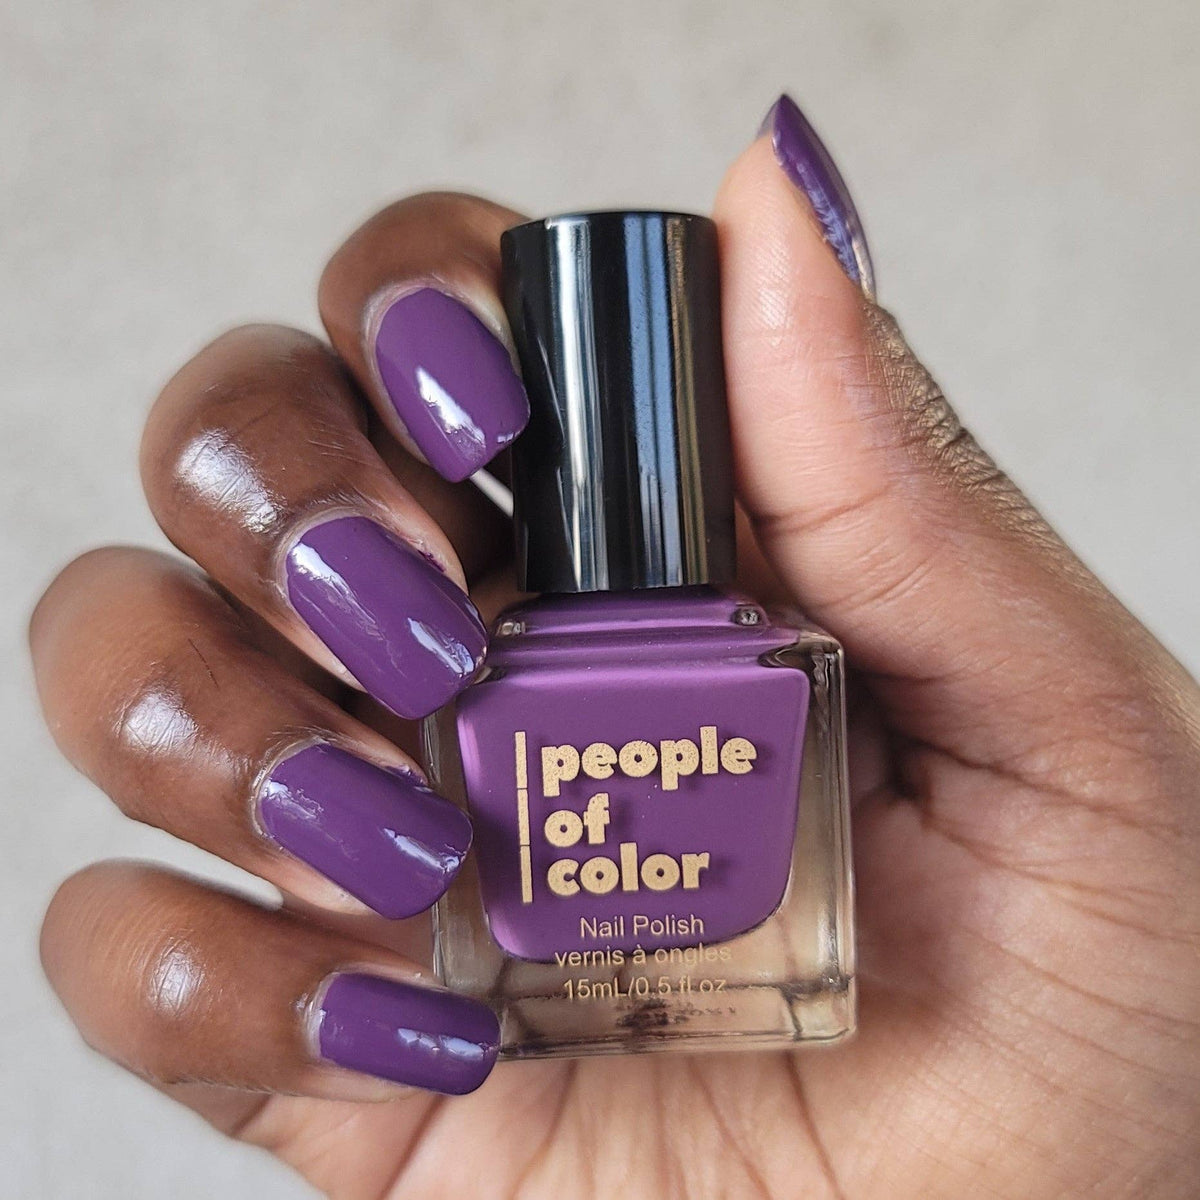 People of Color Vegan Nail Polish Passionflower color